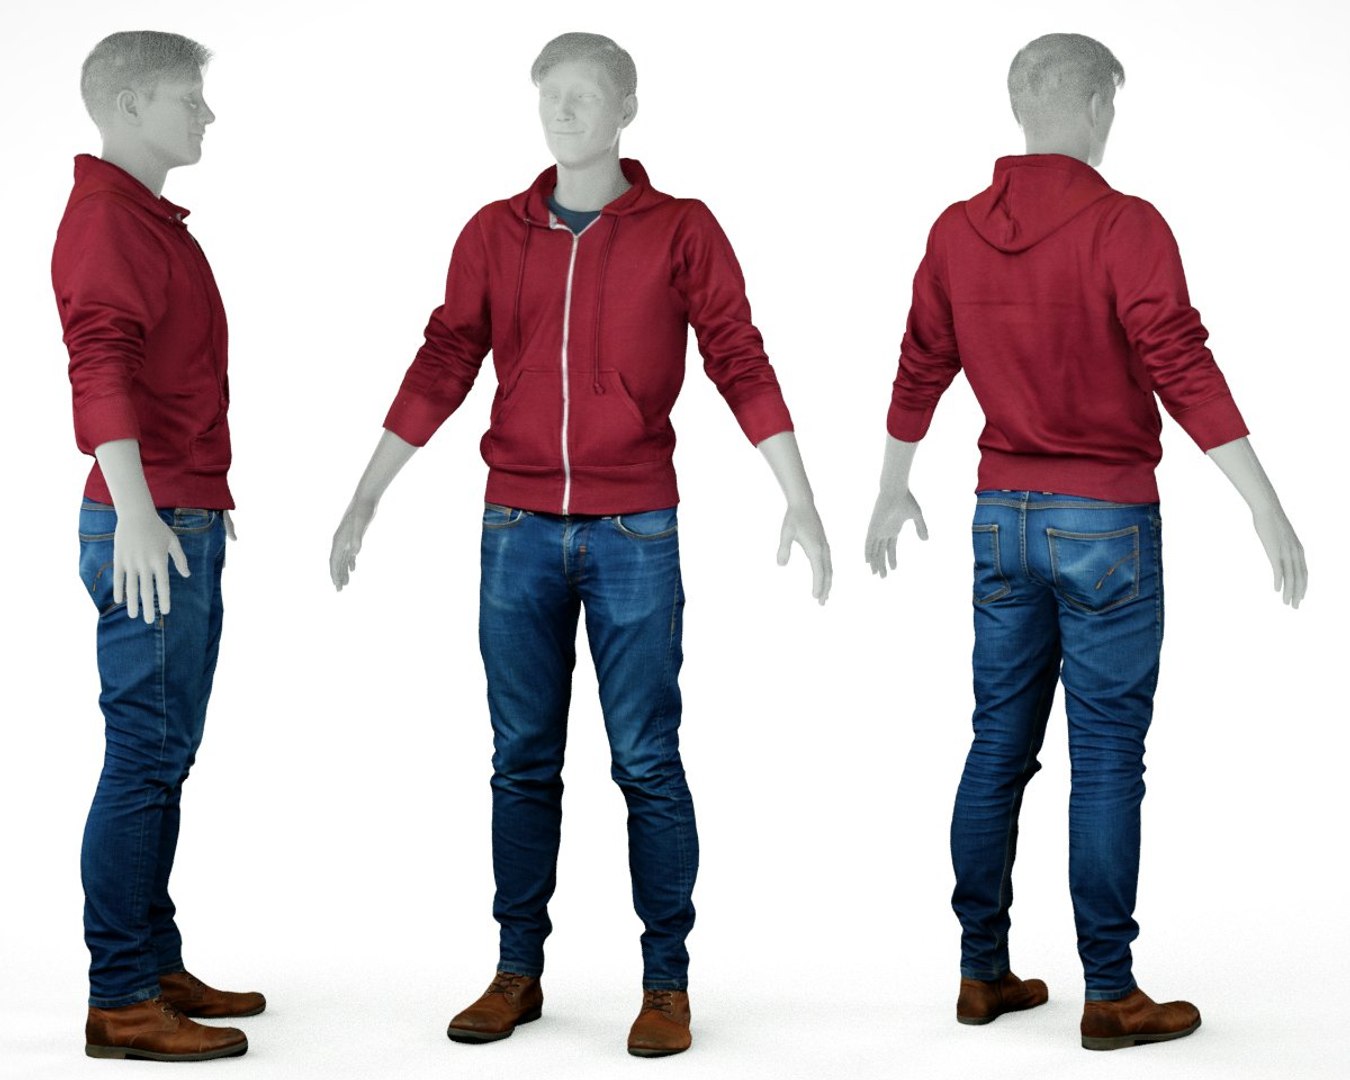 Male clothing outfit 3D model - TurboSquid 1329714